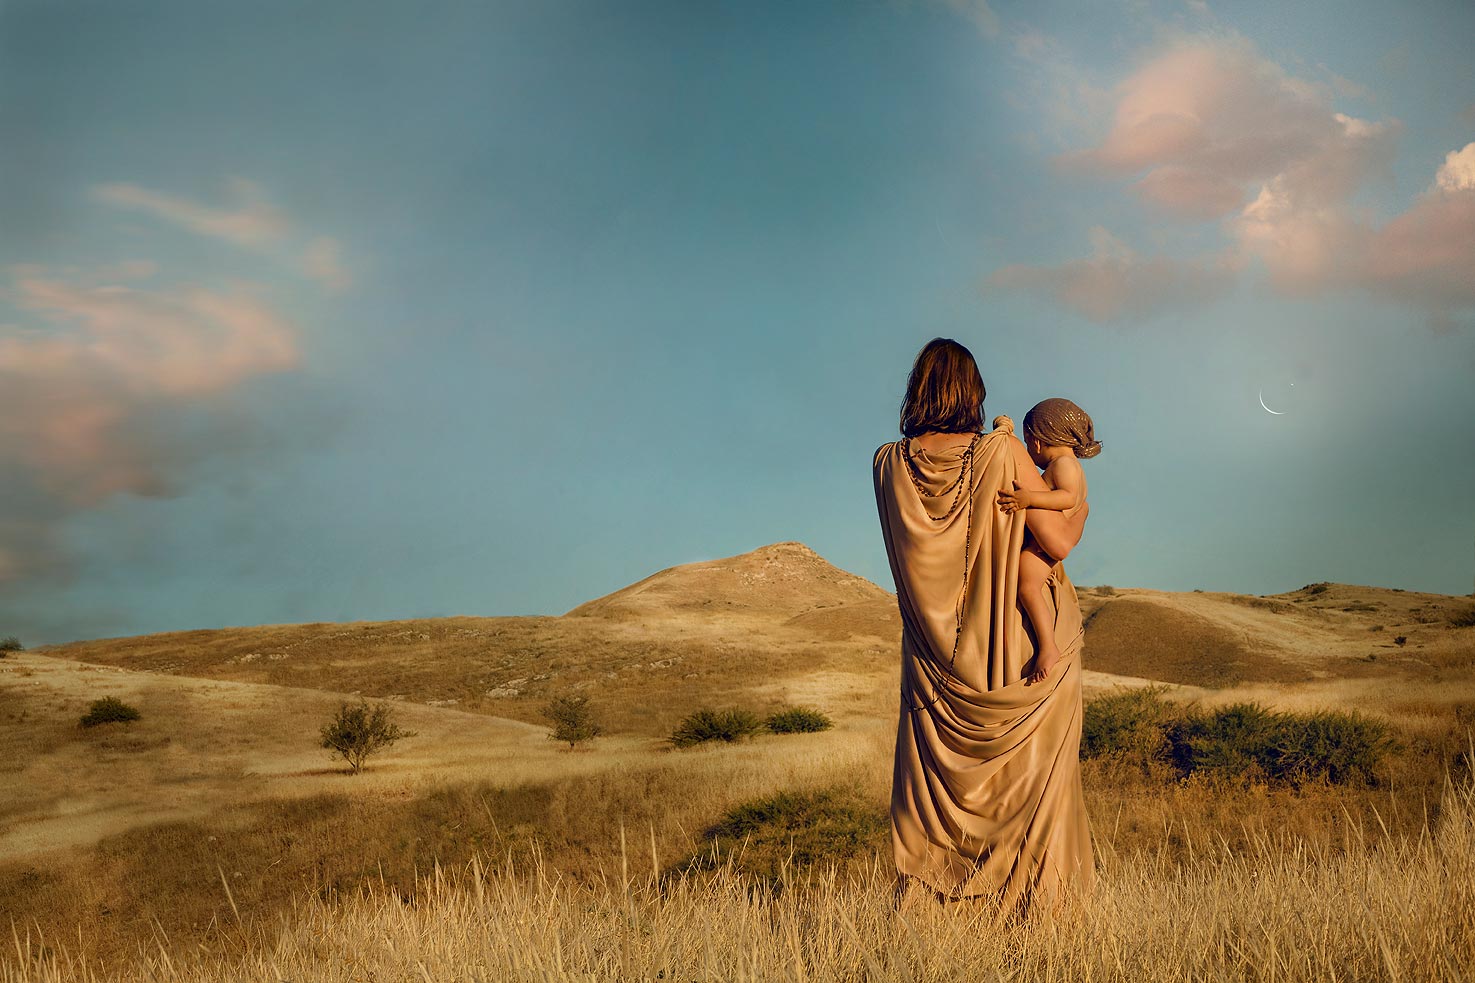 WOMEN OF THE BIBLE” PHOTOGRAPHY BOOK